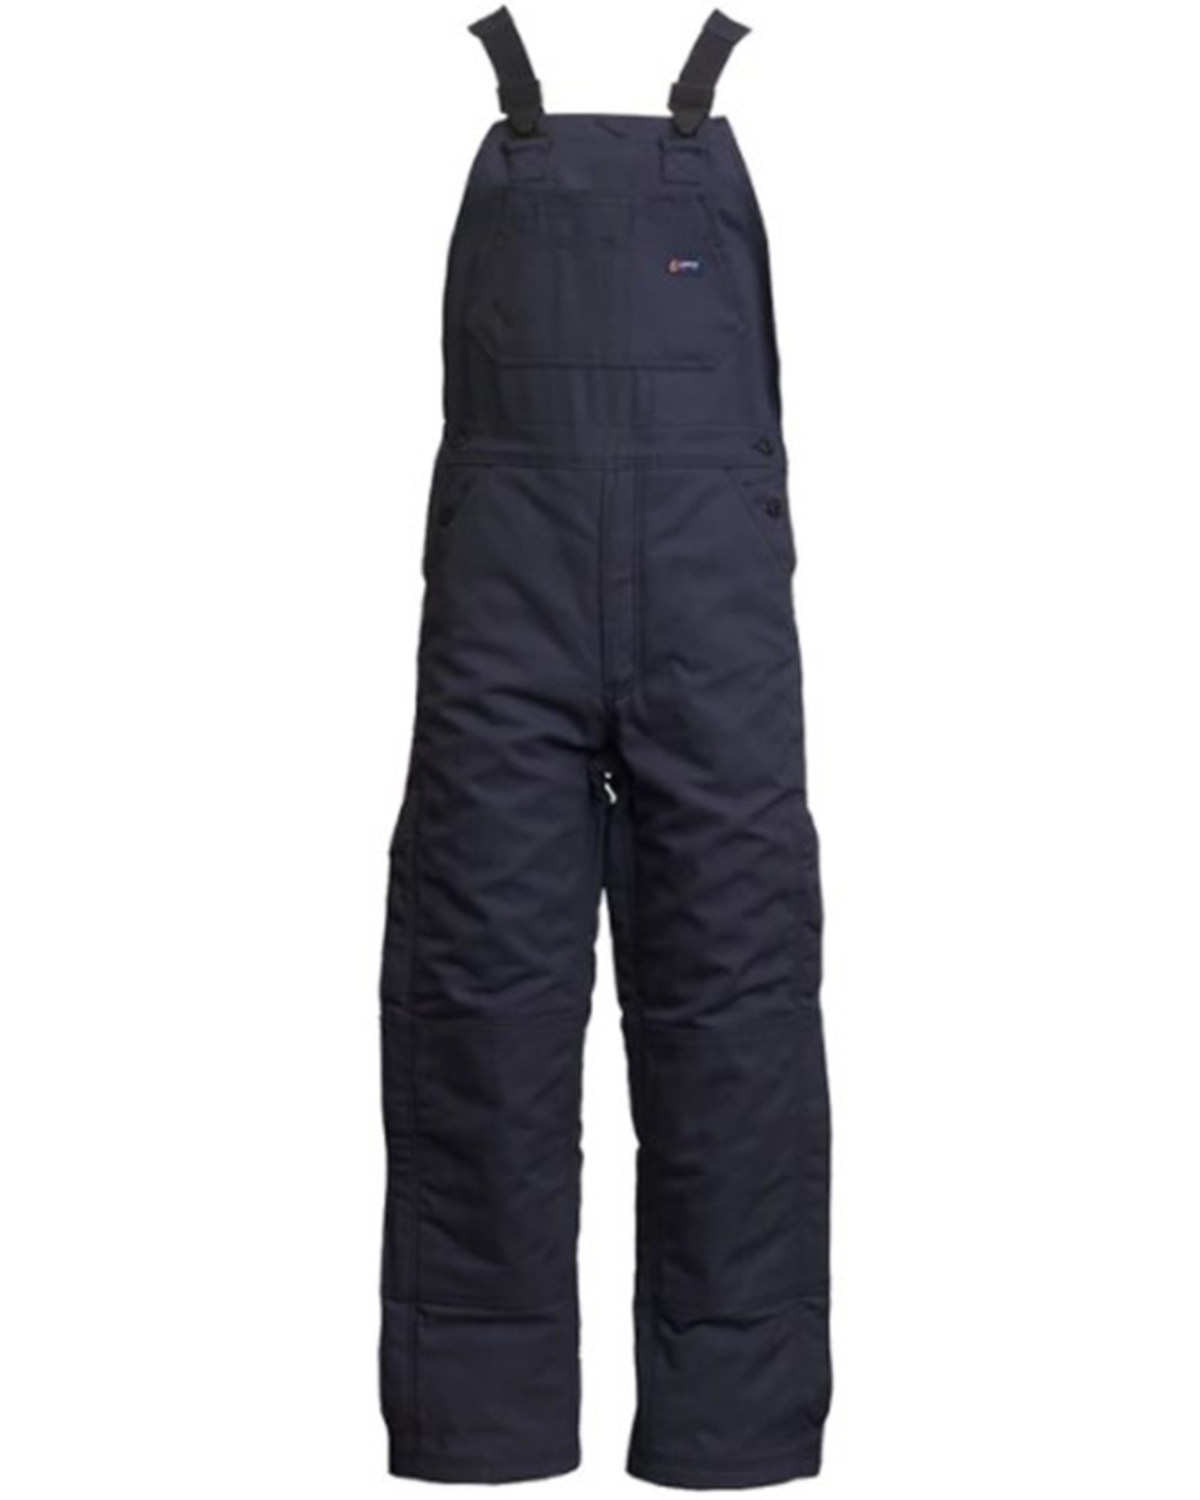 Lapco Men's FR 12oz. Cotton Duck Insulated Big Work Overalls